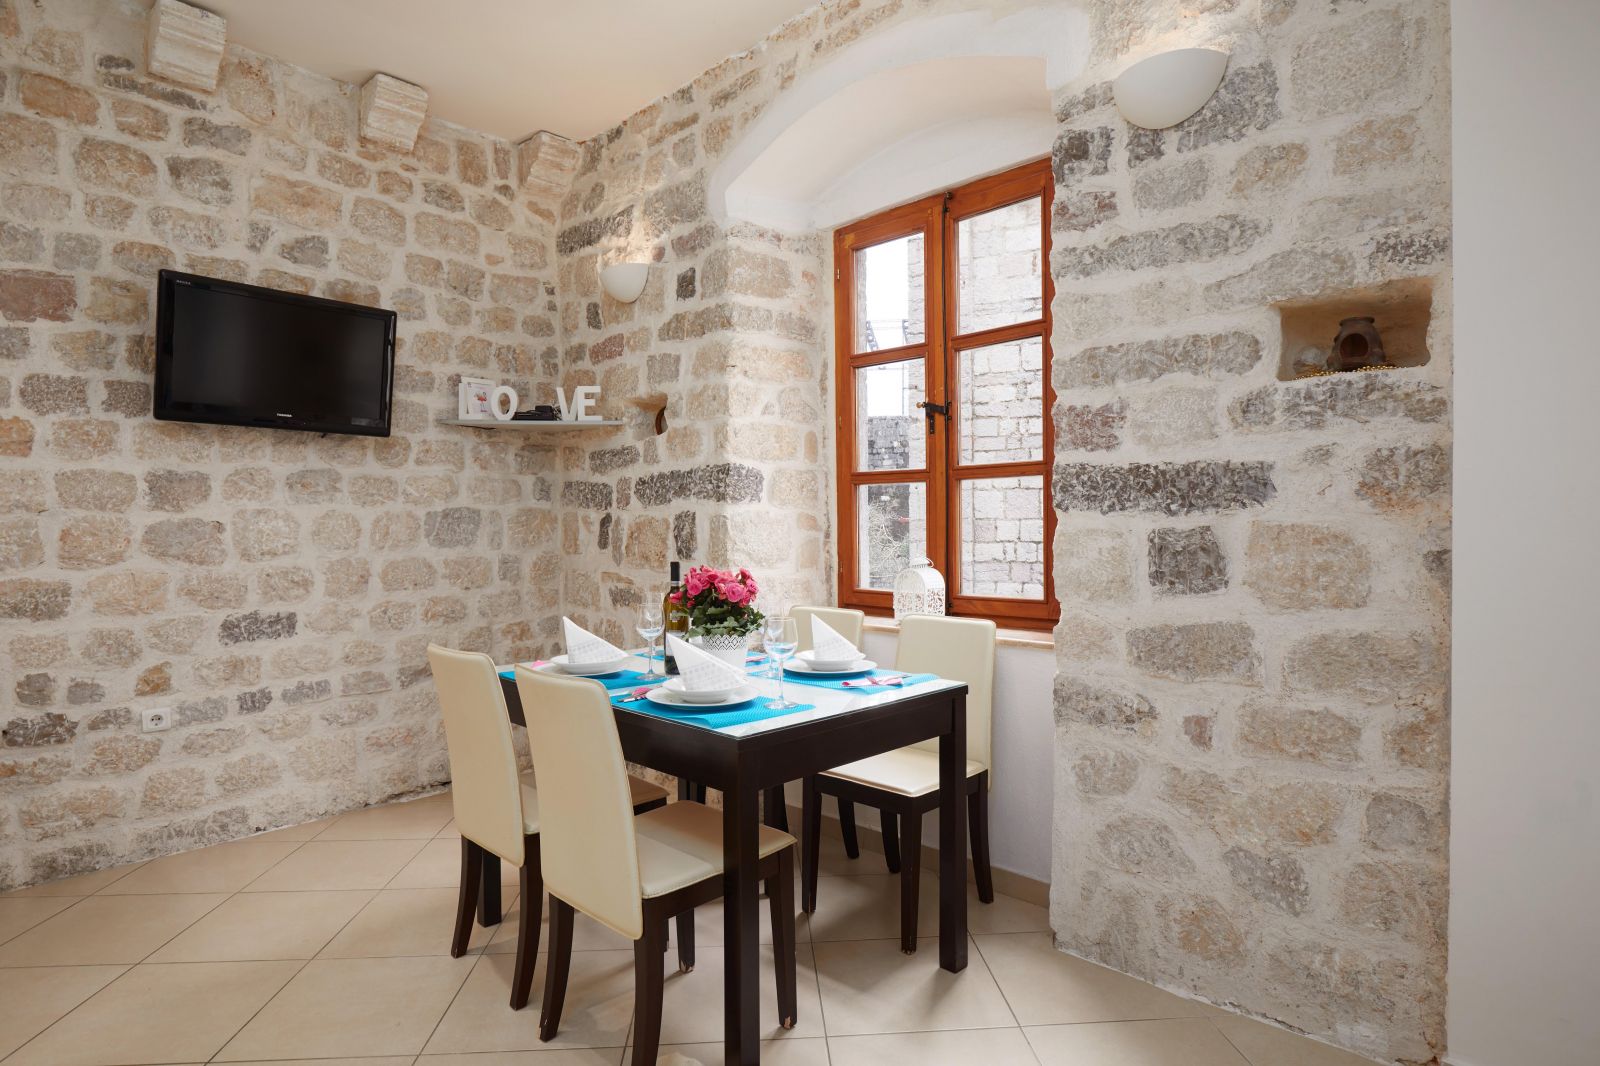 Kotor, Montenegro, dinning table and tv